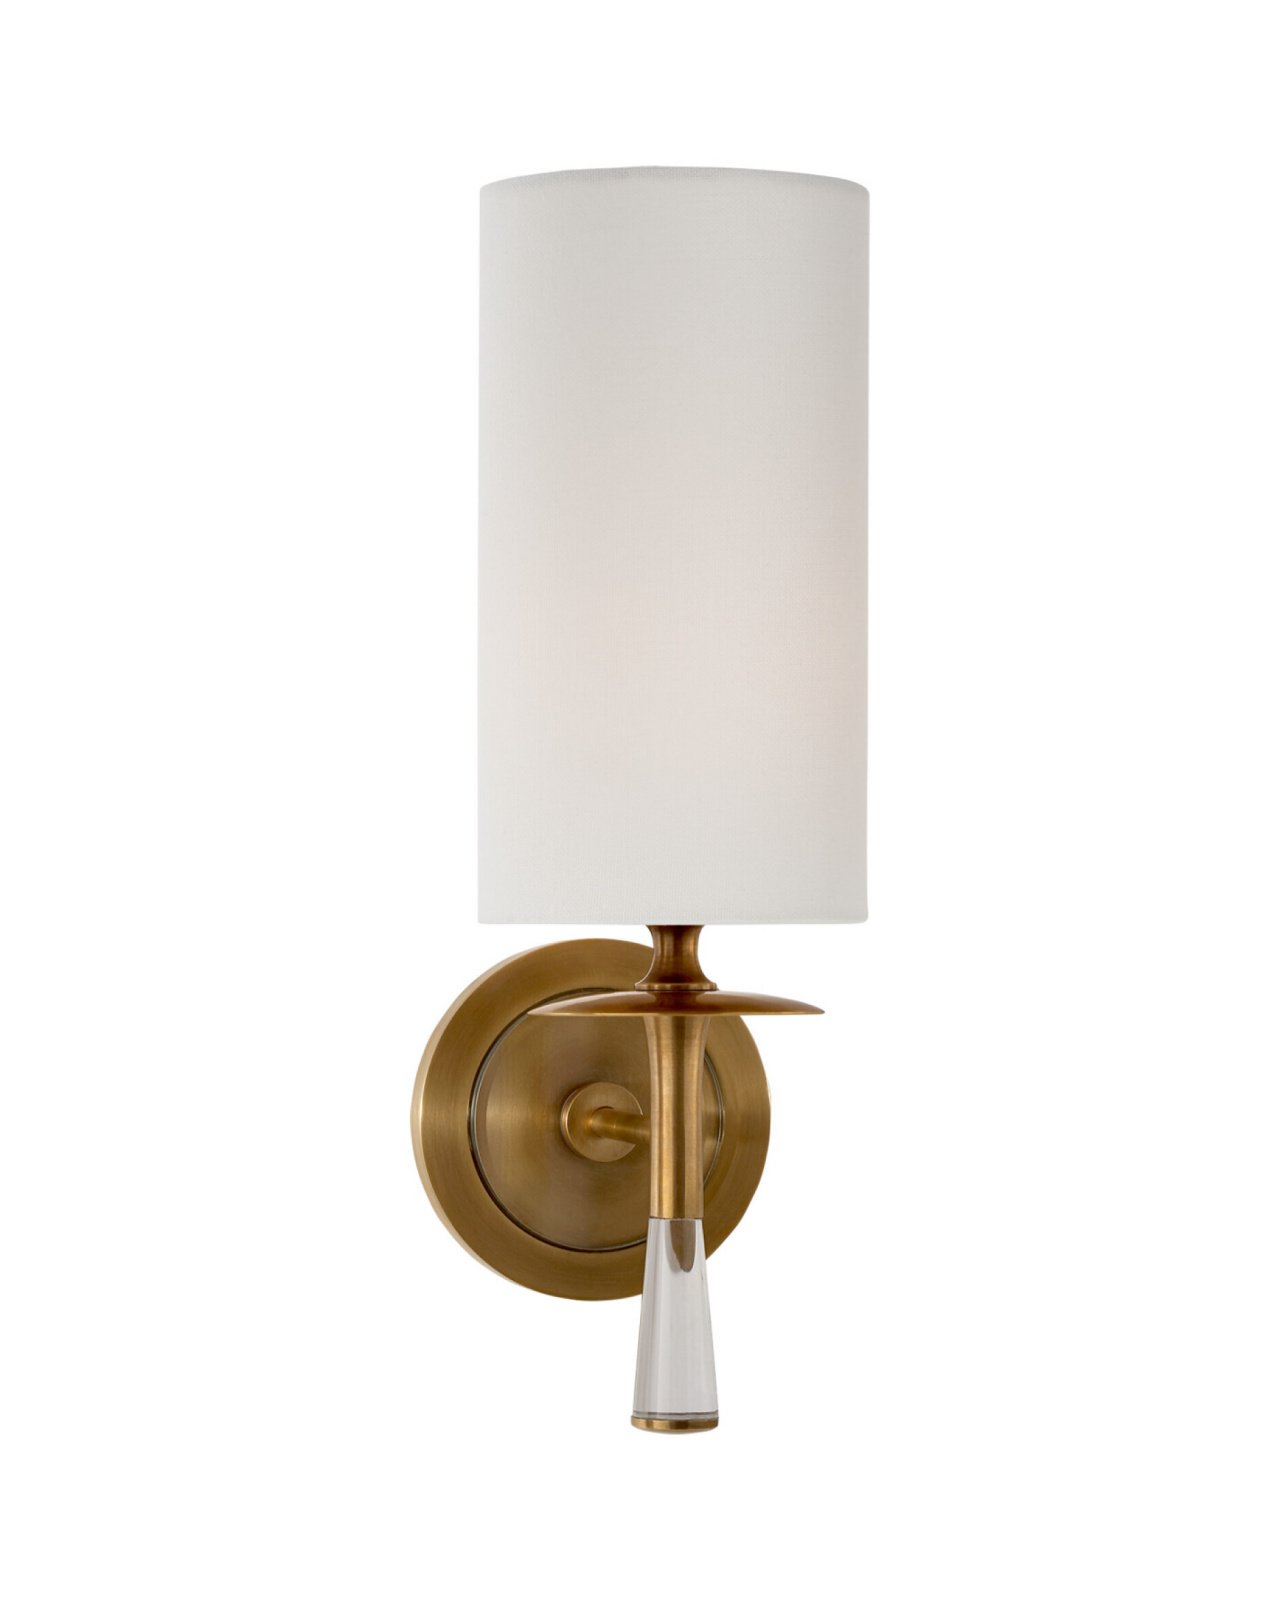 Drunmore Single Sconce Antique Brass and Crystal/Linen